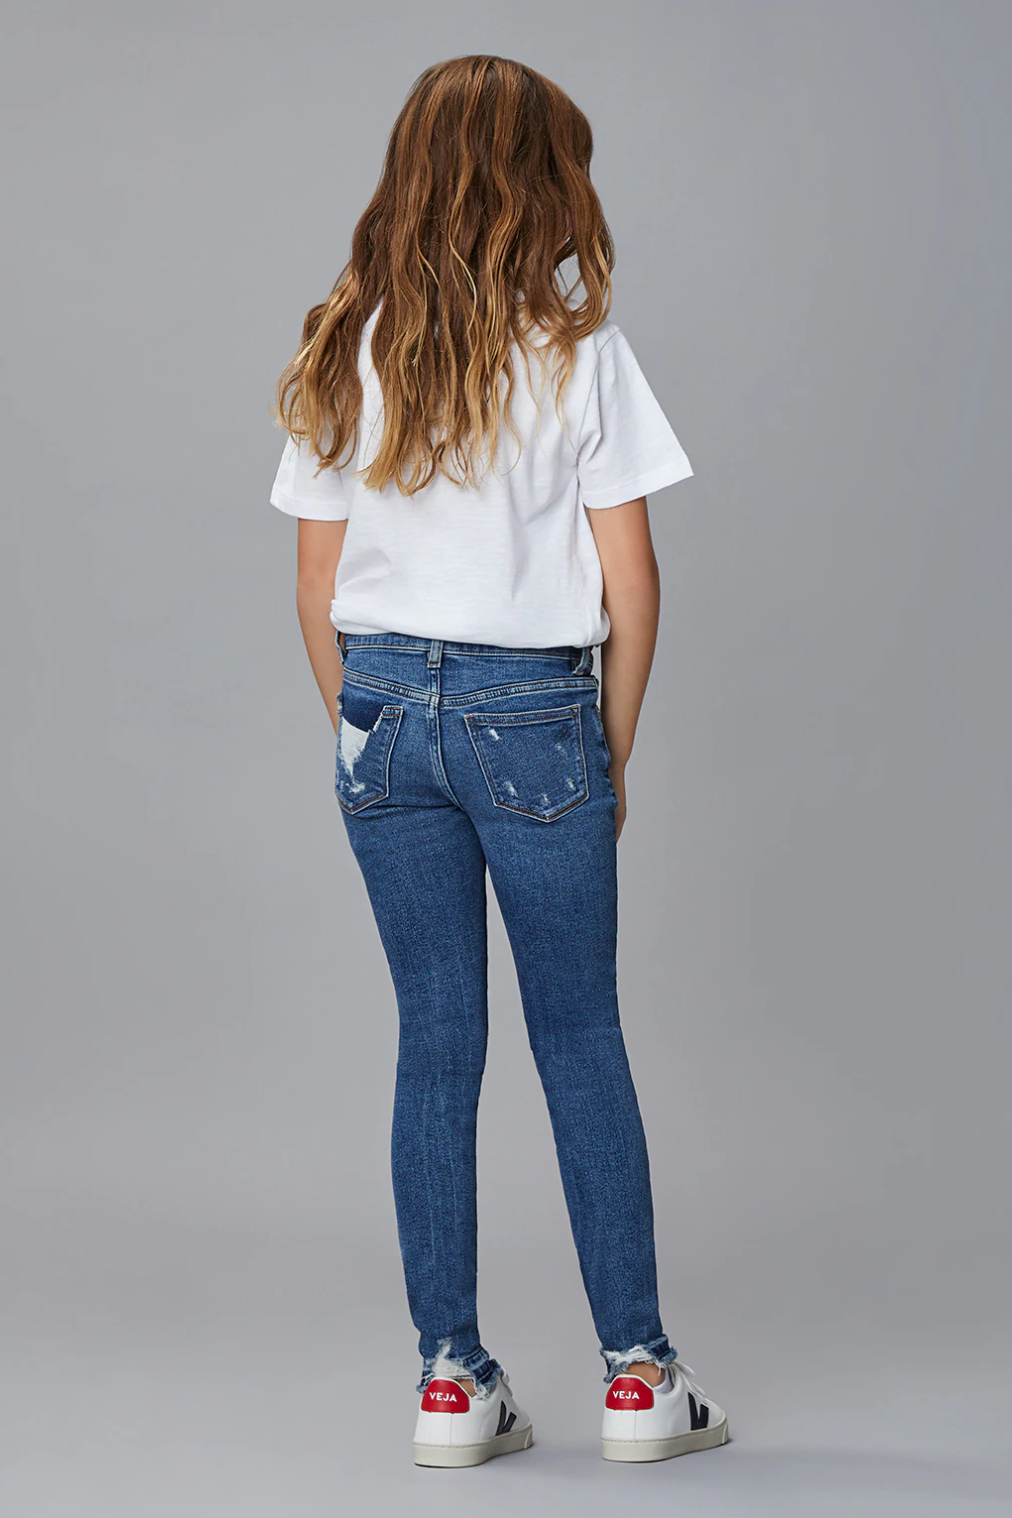 The Chloe Distressed Skinny Jeans in Riptide by DL1961